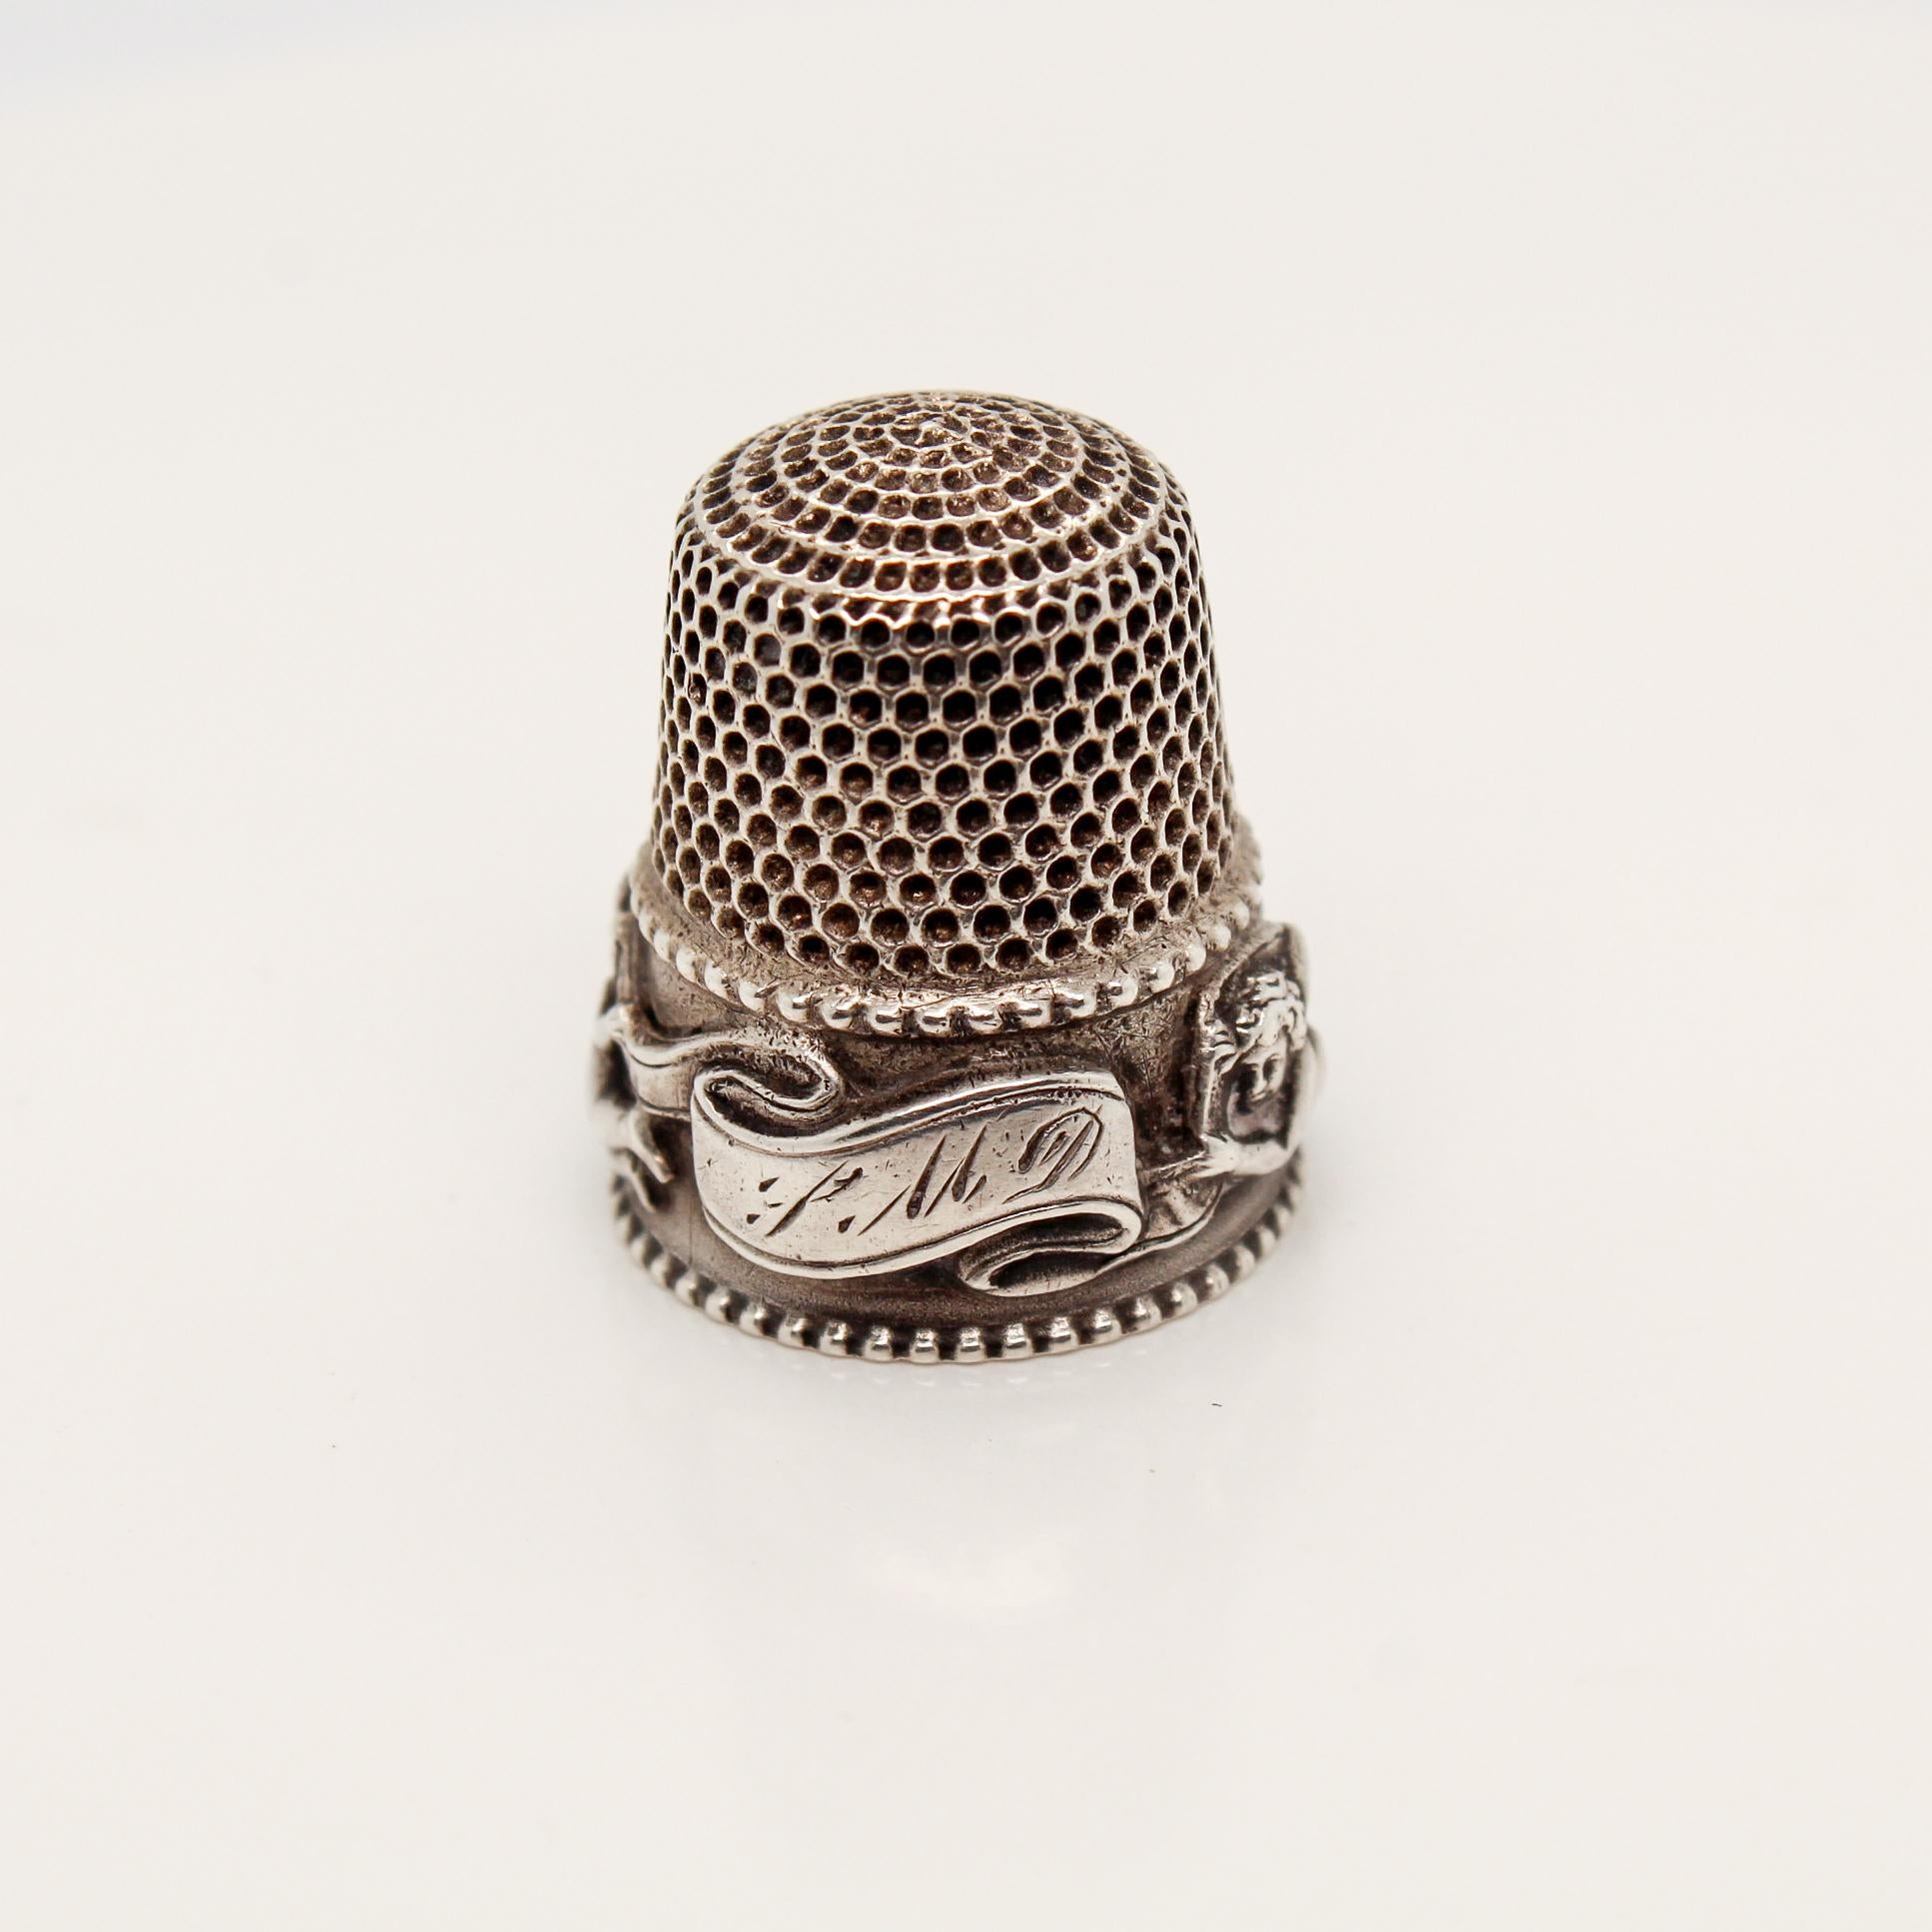 A fine sterling silver 'Cupid Special' thimble.

By Stern Bros & Company. 

Stern Bros & Co. was founded in Philadelphia in 1868 by Nathan Stern and would relocate to New York within a few years of its founding. They functioned out of New York until